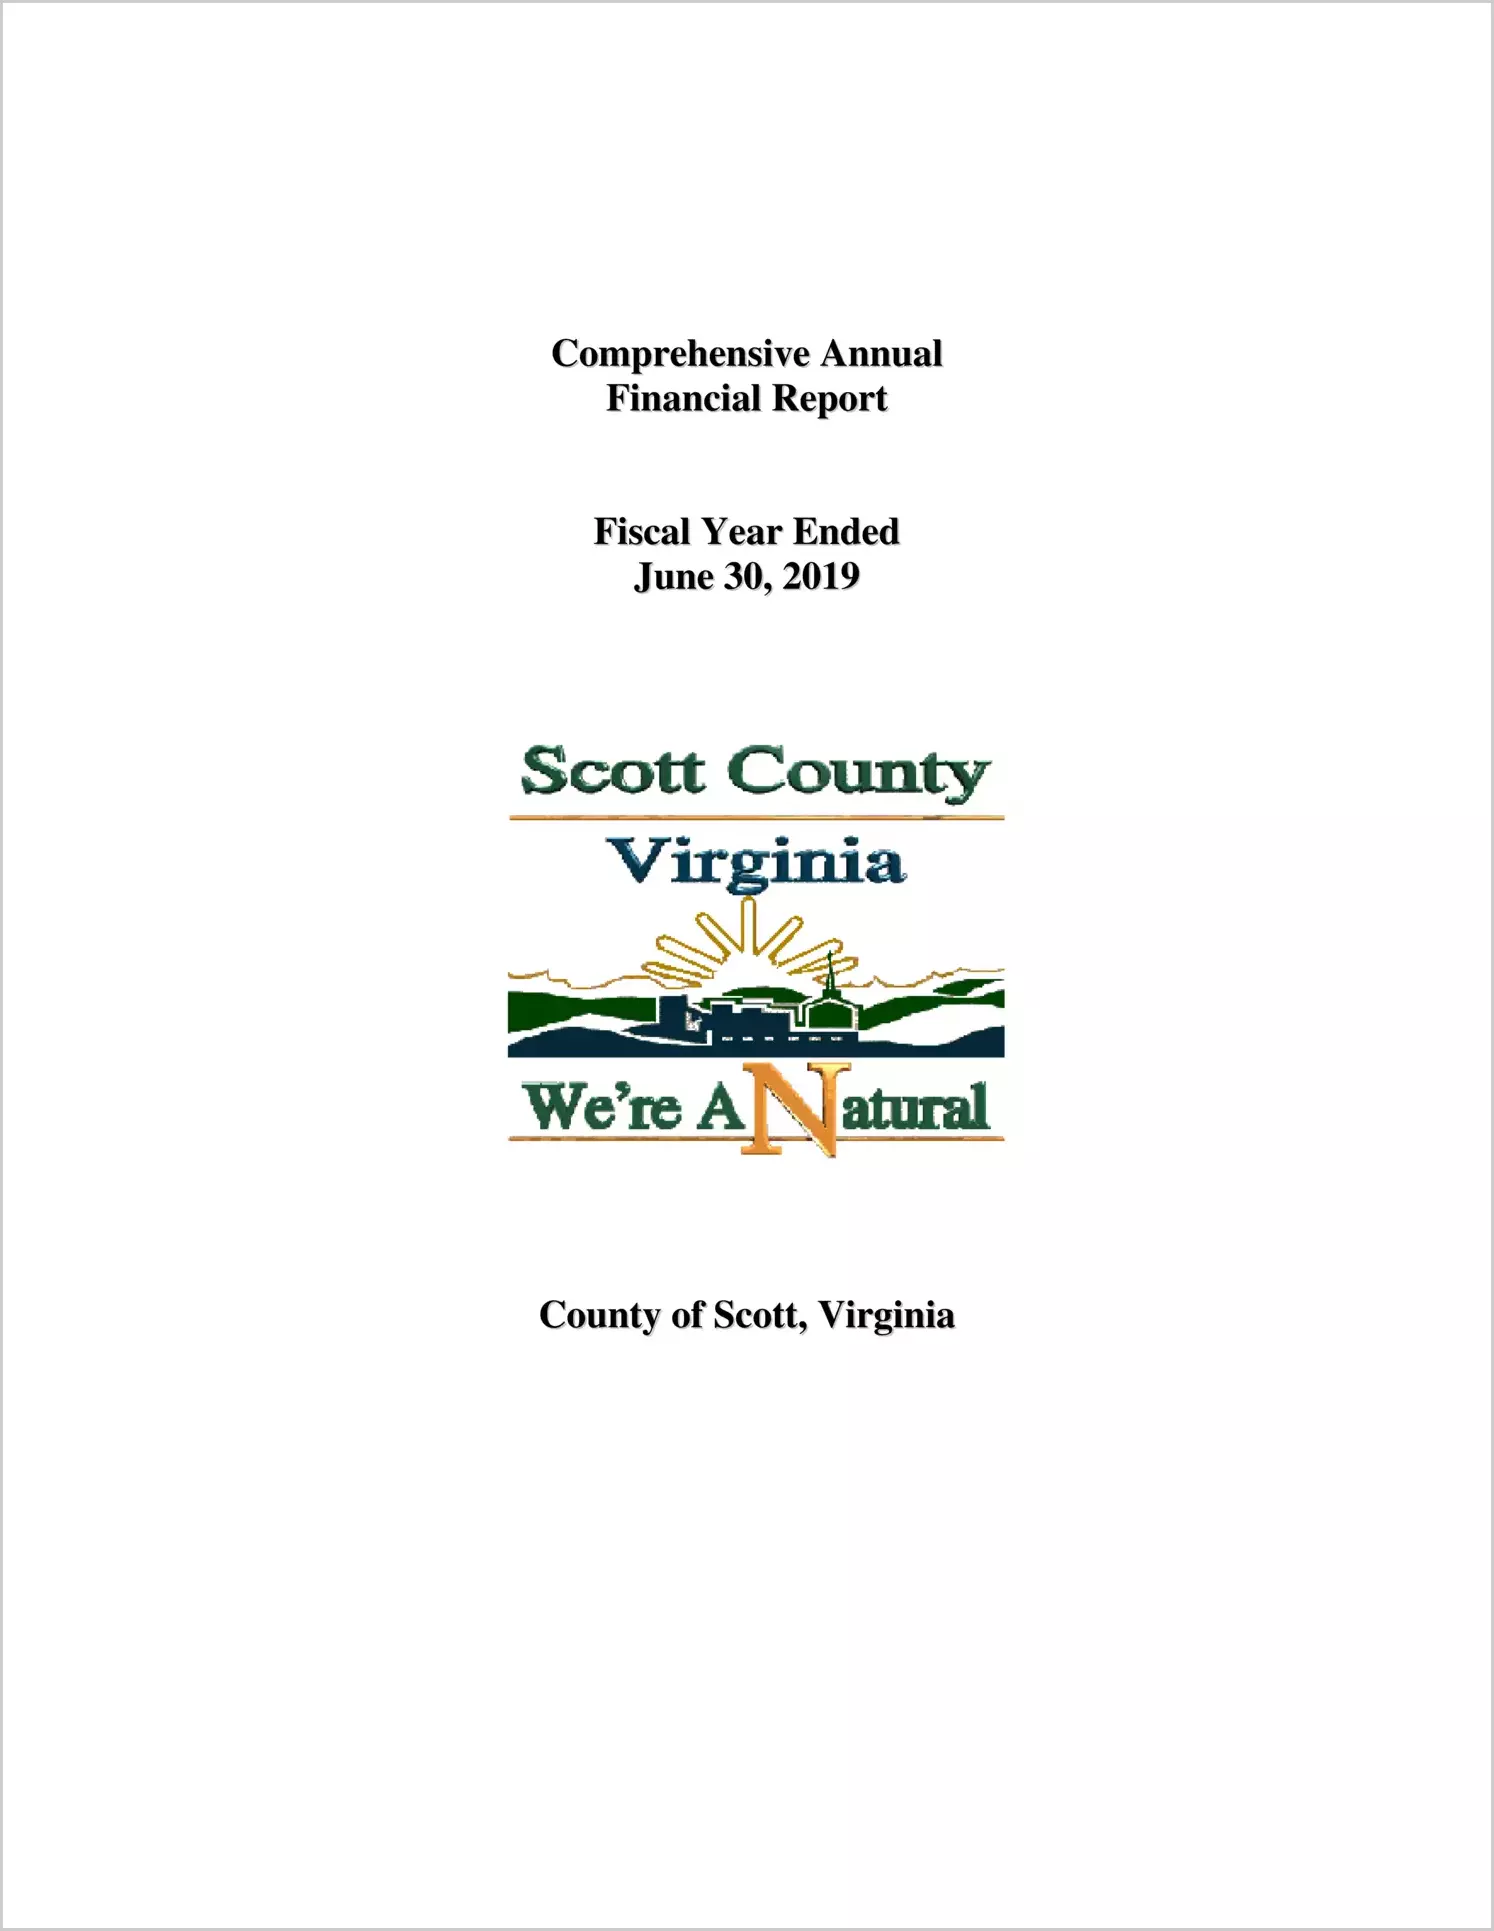 2019 Annual Financial Report for County of Scott